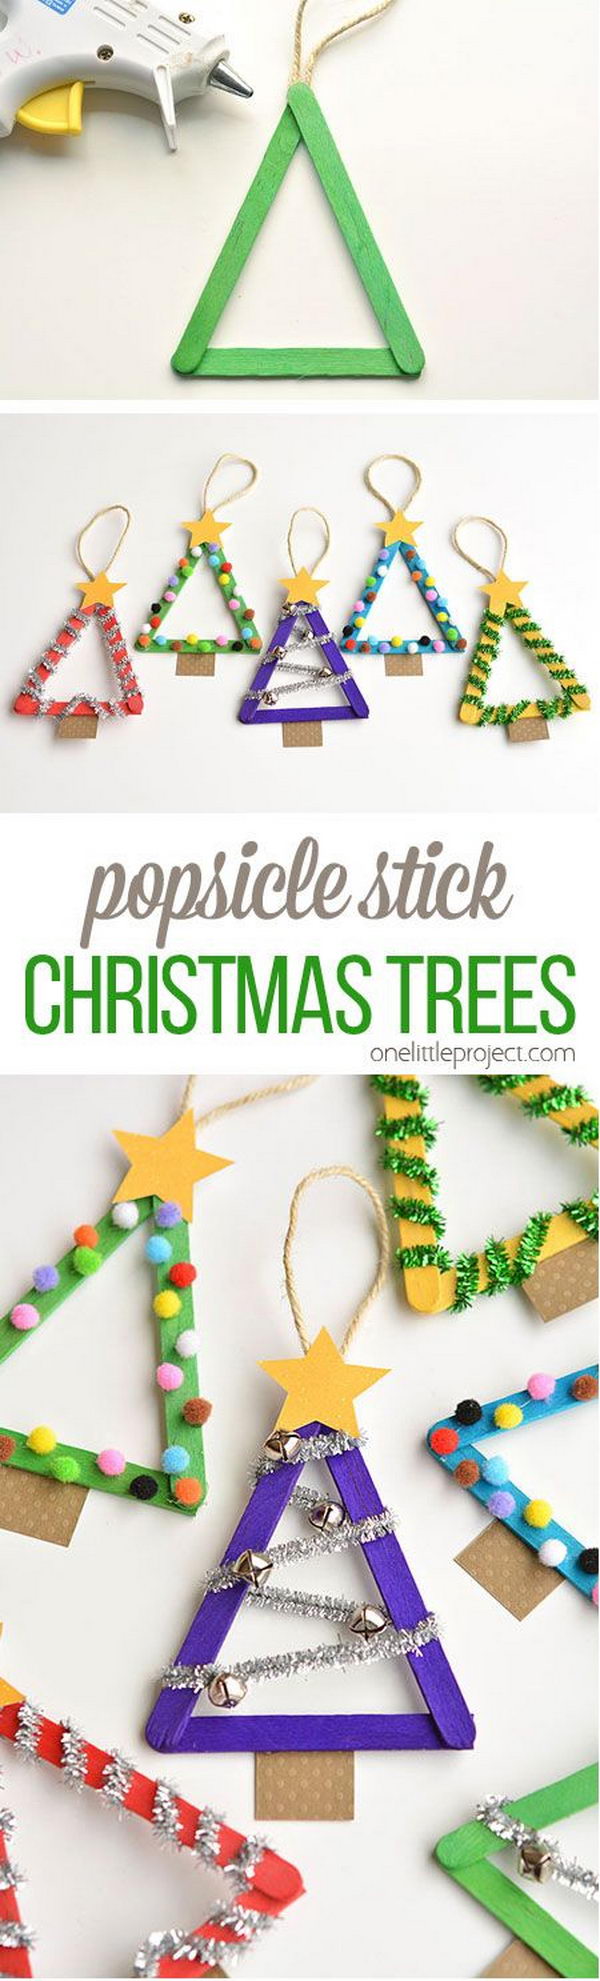 Popsicle Stick Christmas Trees. 